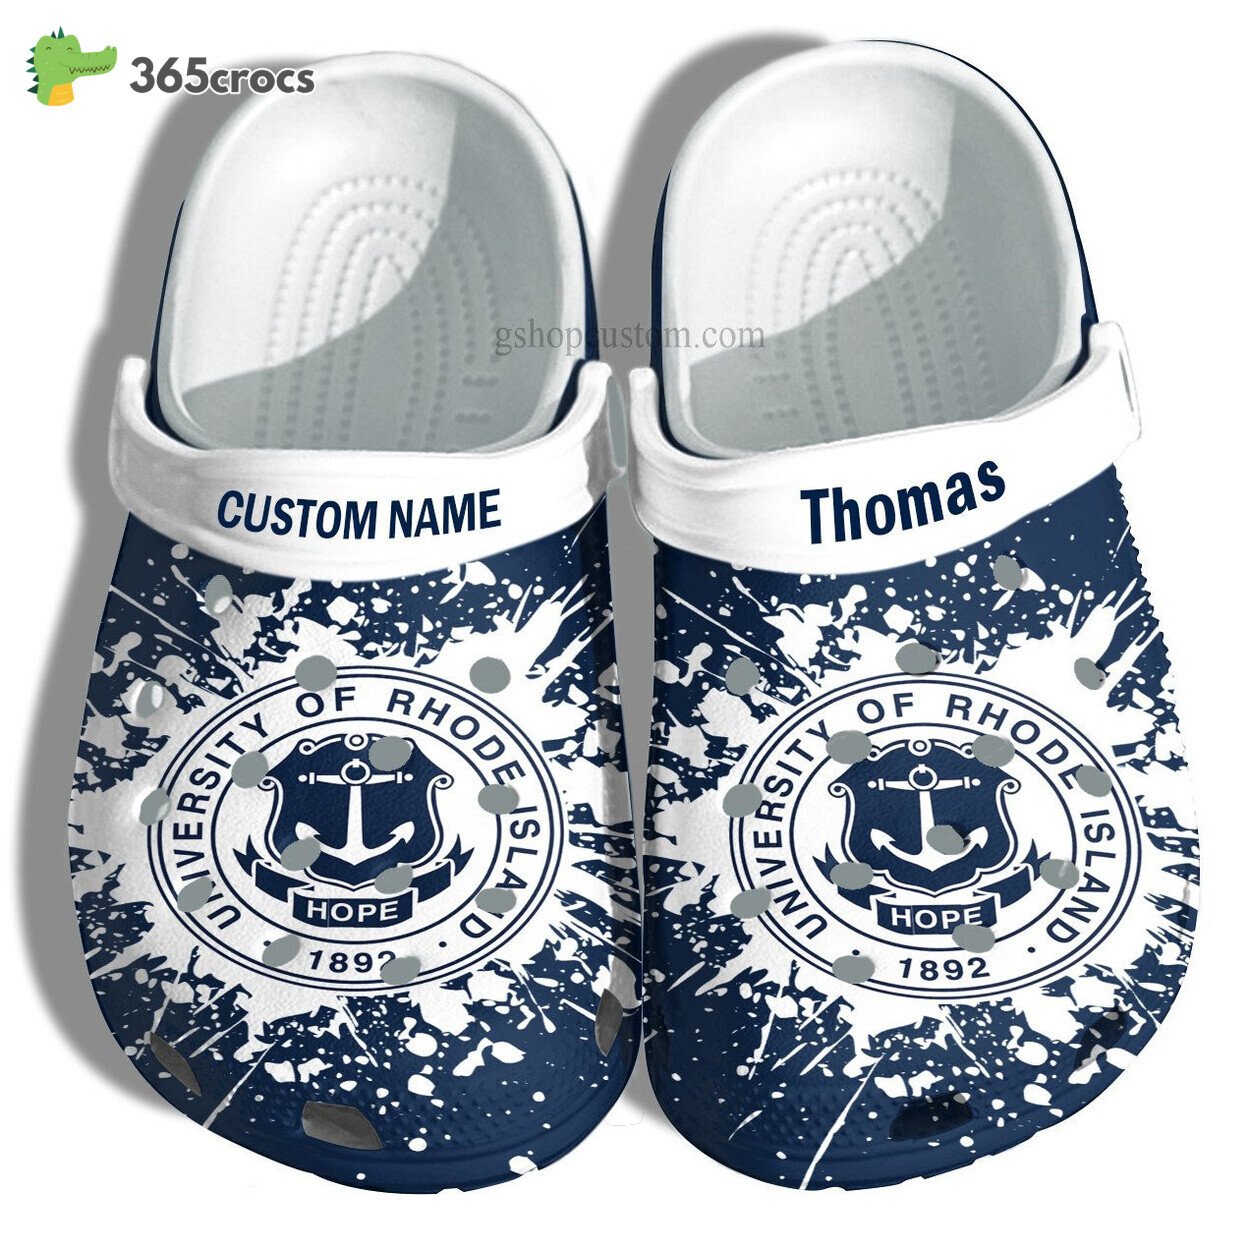 University Of Rhode Island Graduation Gifts Croc Shoes Customize Admission Gift Shoes